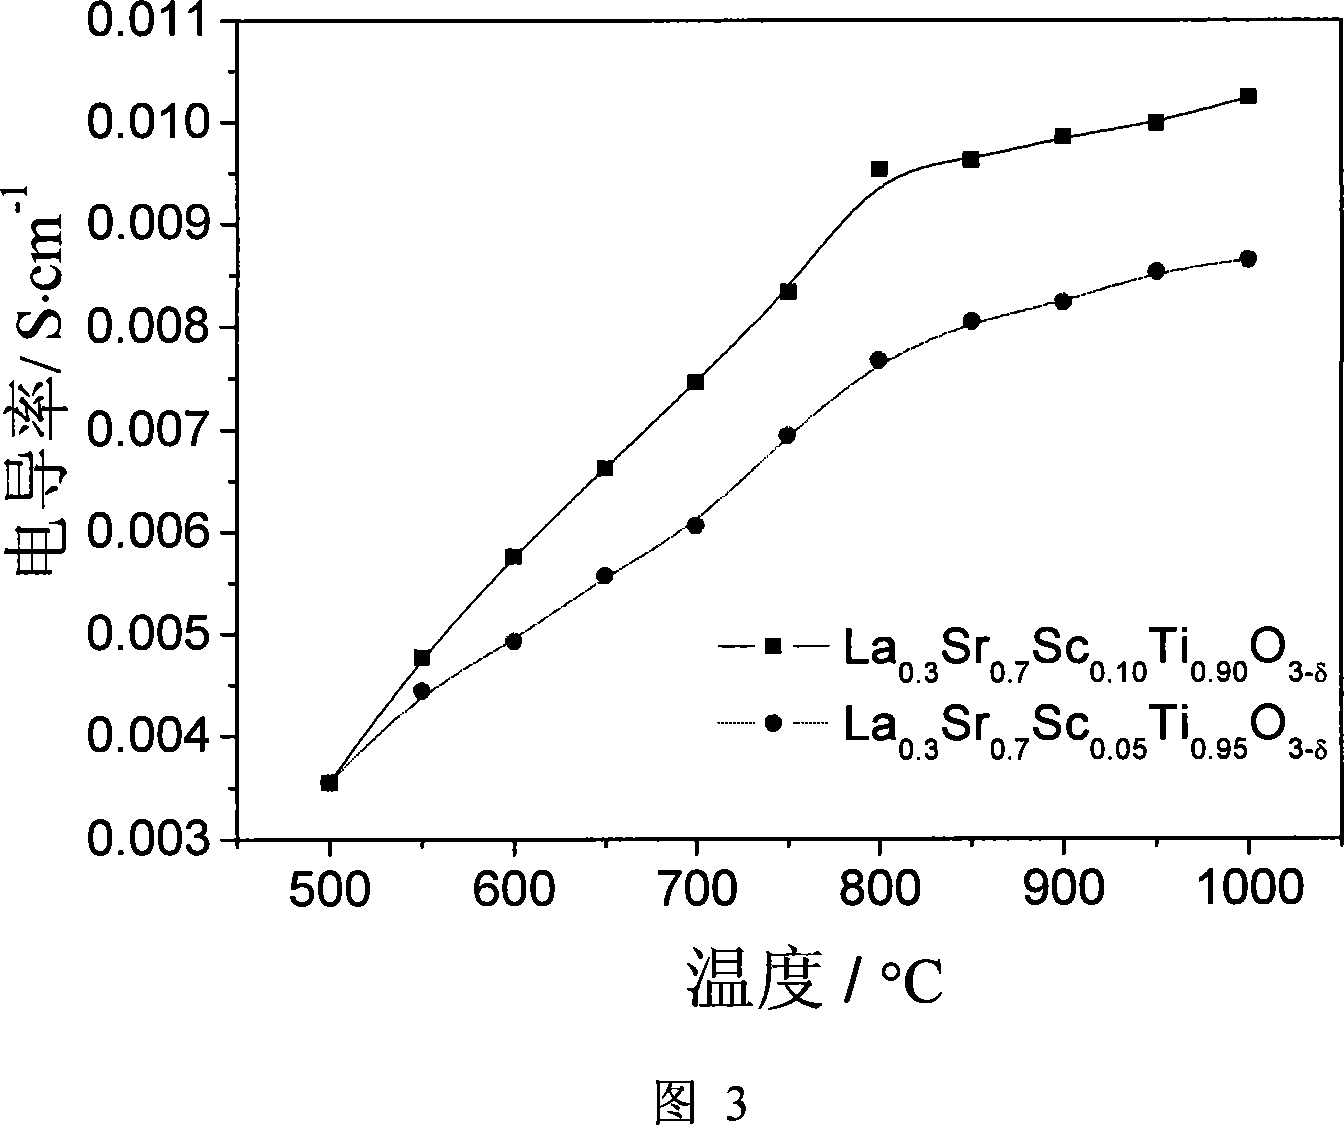 A cathode material for A and B adulterated SrTiO3 solid oxide fuel battery